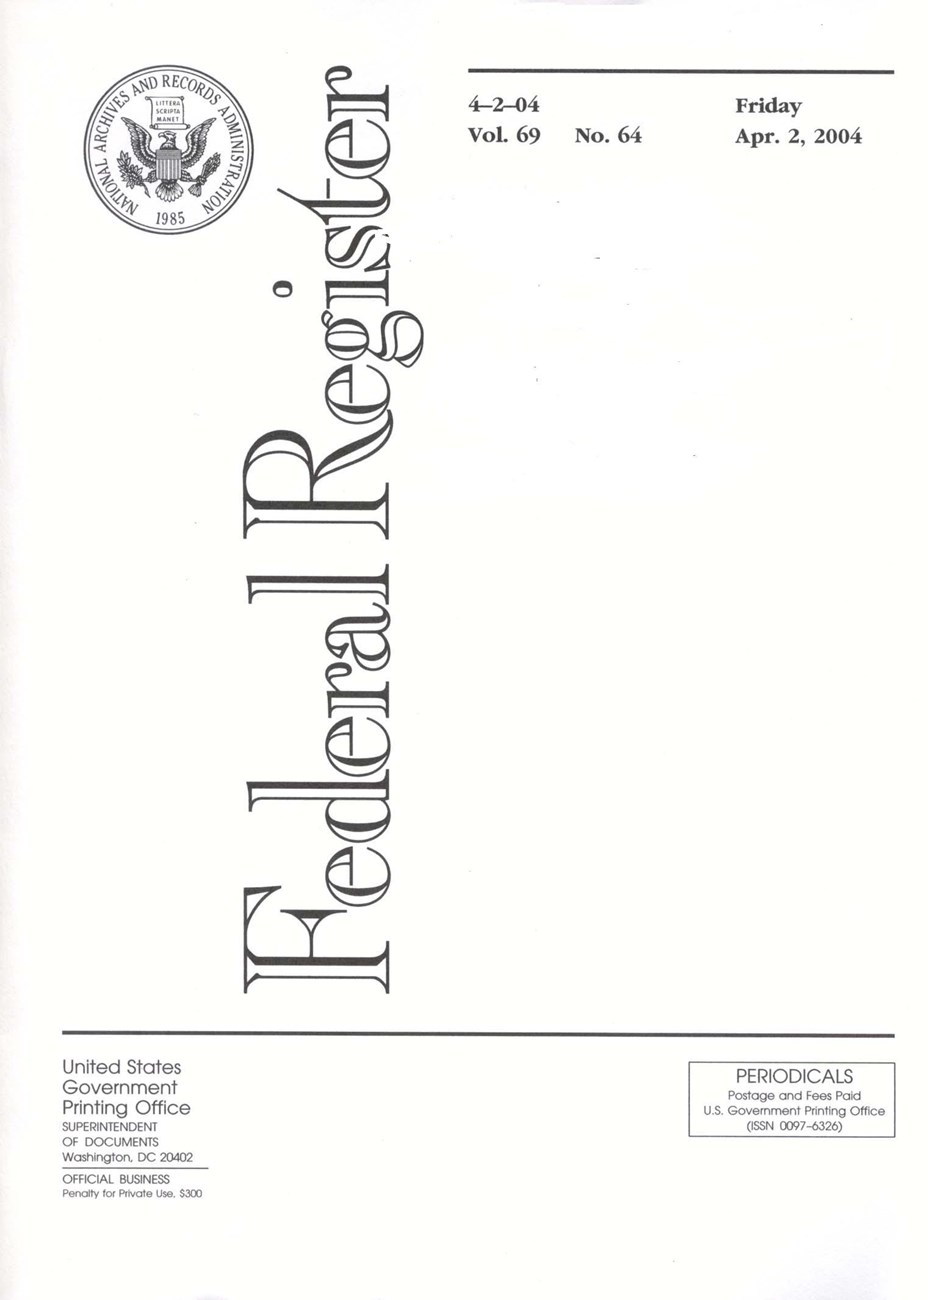 cover of a book called the Federal Register